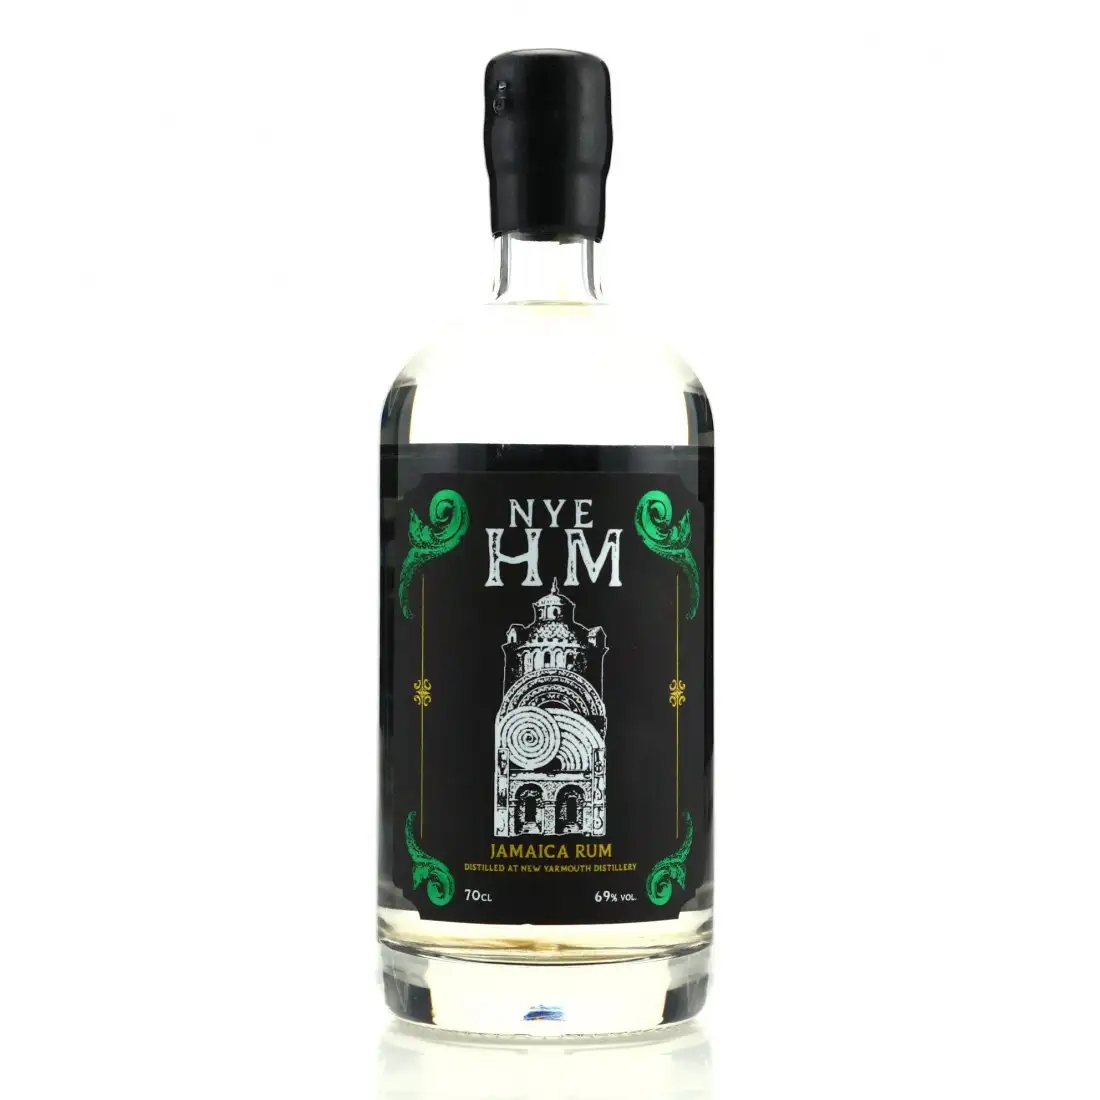 Image of the front of the bottle of the rum NYE HM Jamaica Rum NYE